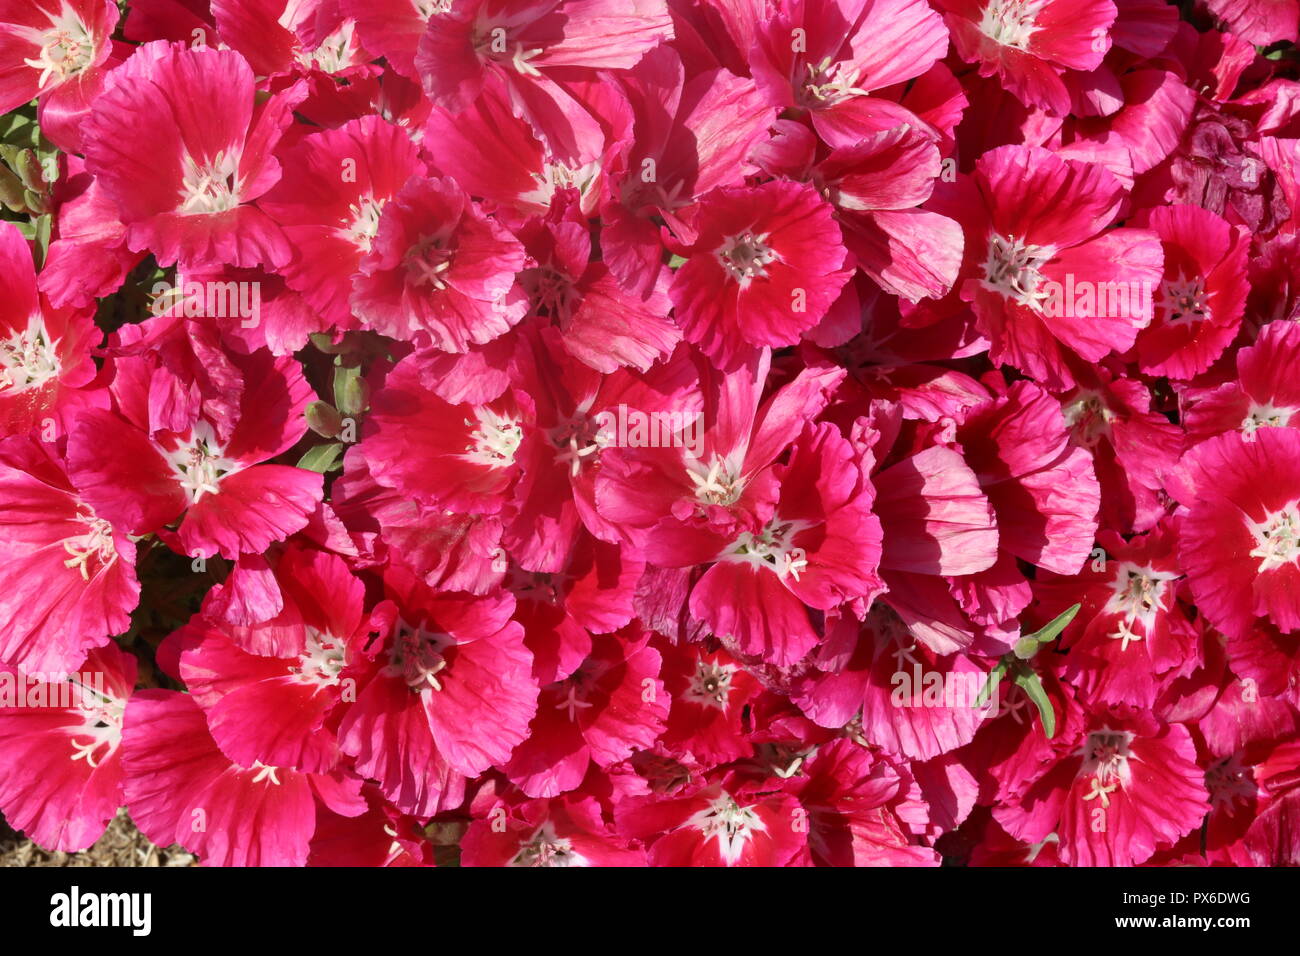 Red Flowers. Red garden flowers - Clarkia Godetia. Dense flower bed blossoming. Stock Photo